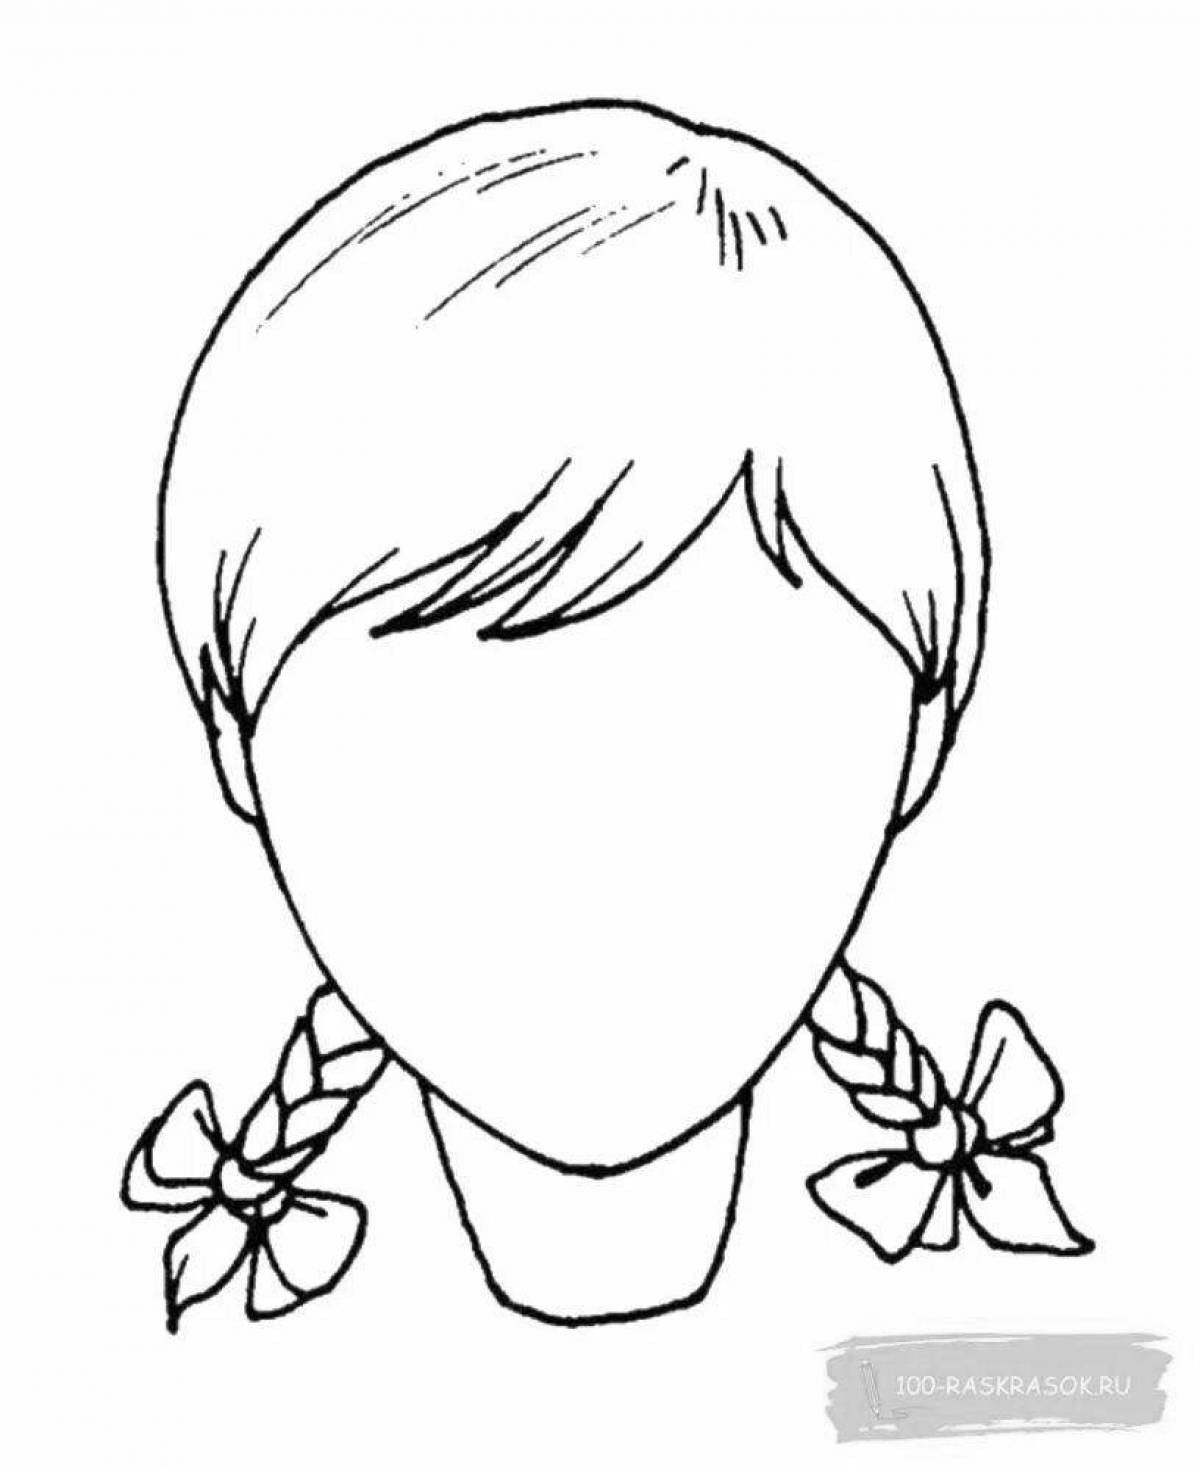 Playful face coloring page for kids